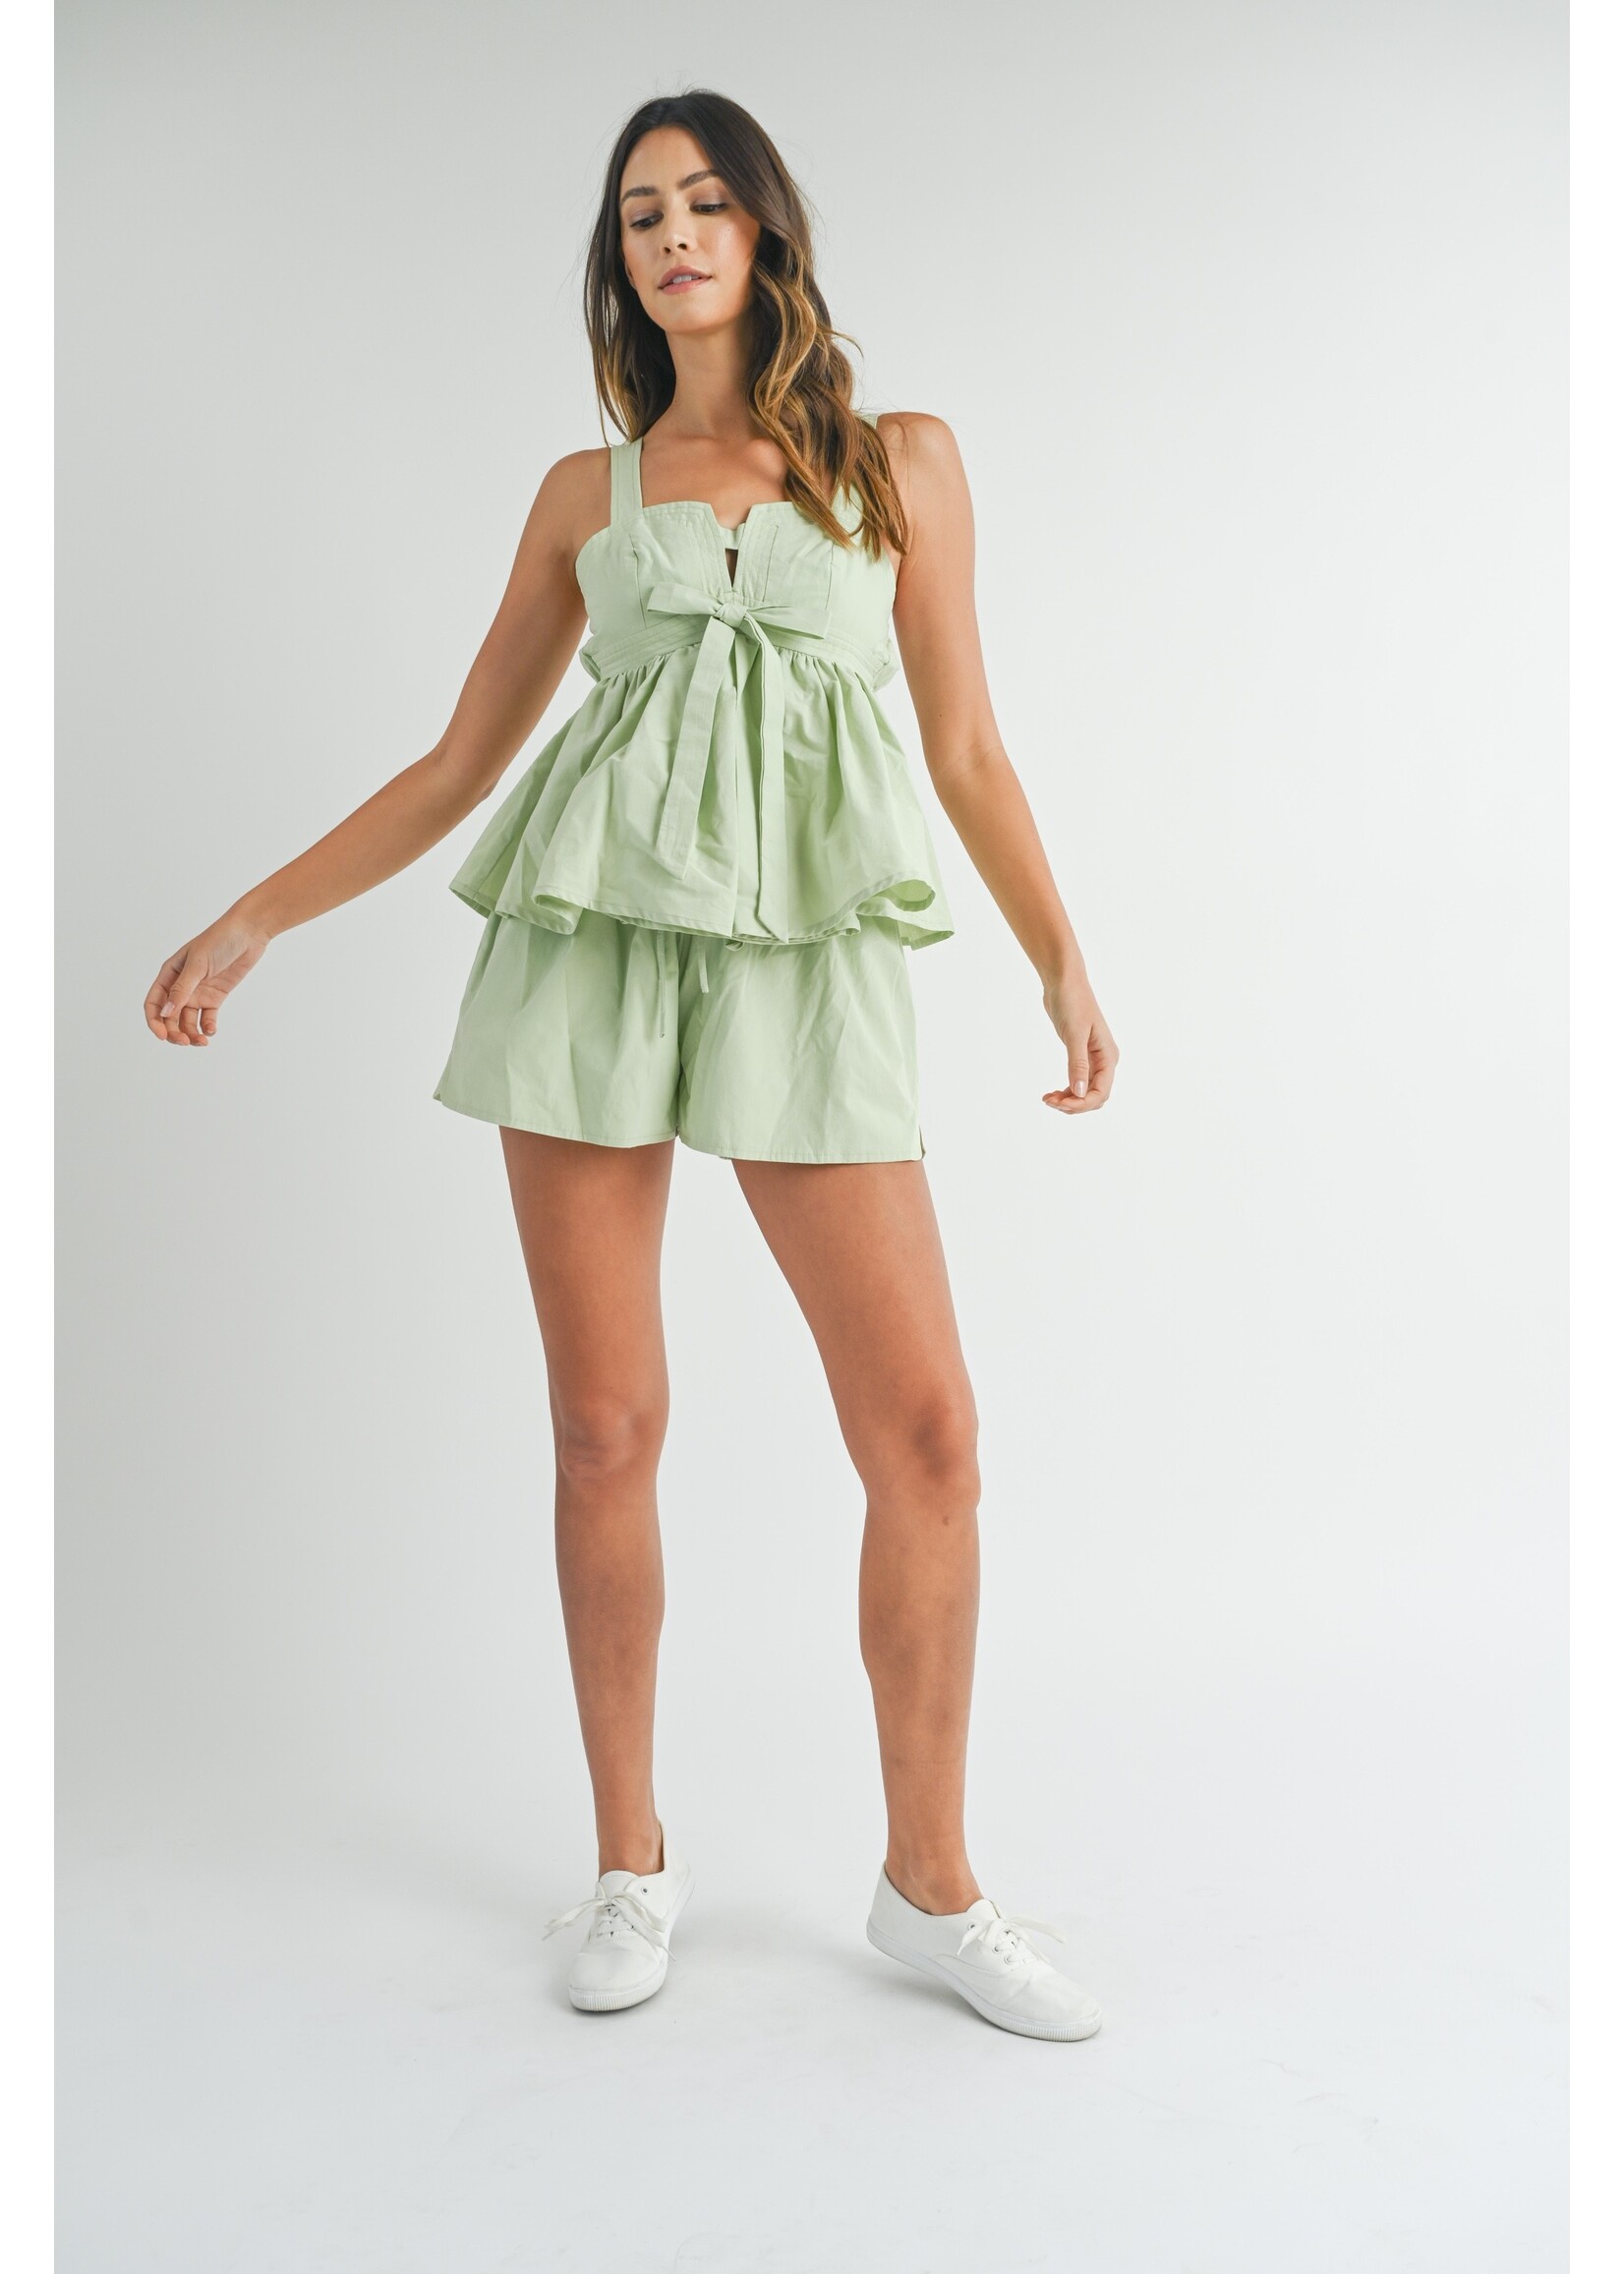 Mable Cut Out Peplum Top and Shorts Set - MST7867